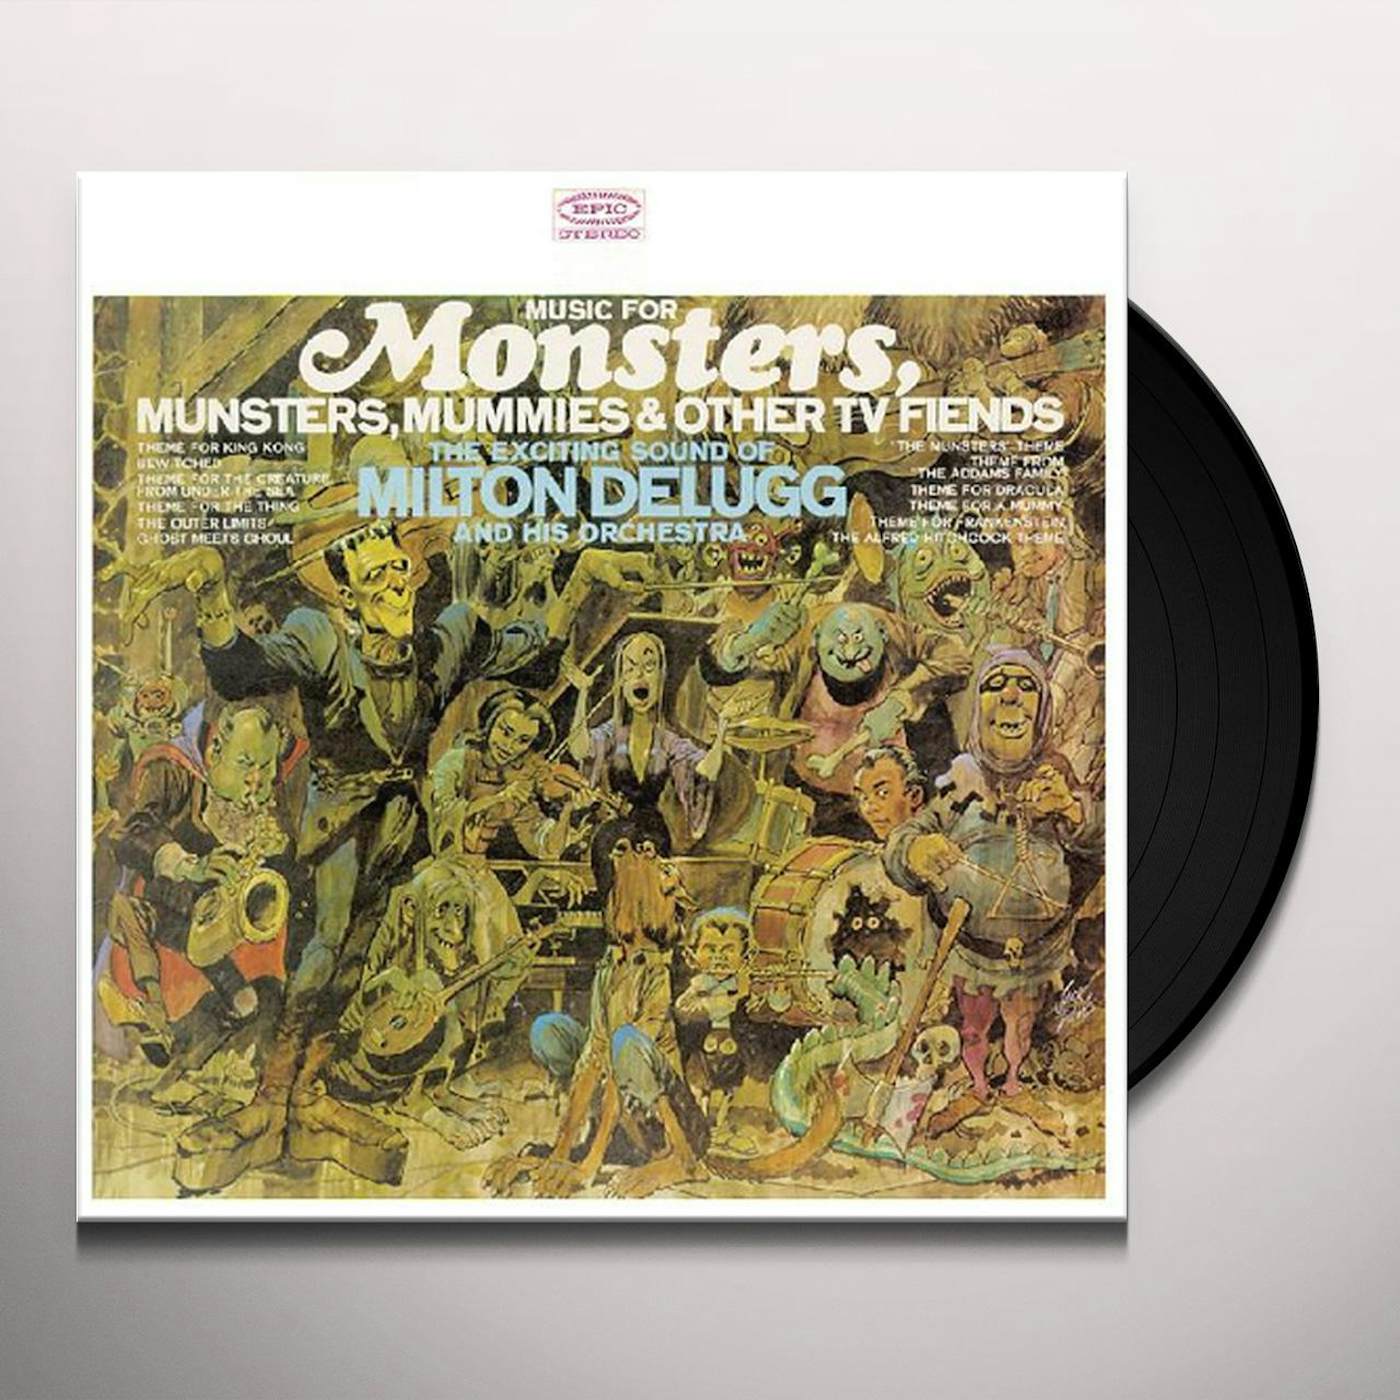 Milton Delugg & Orchestra MUSIC FOR MONSTERS, MUNSTERS, MUMMIES & OTHER TV Vinyl Record